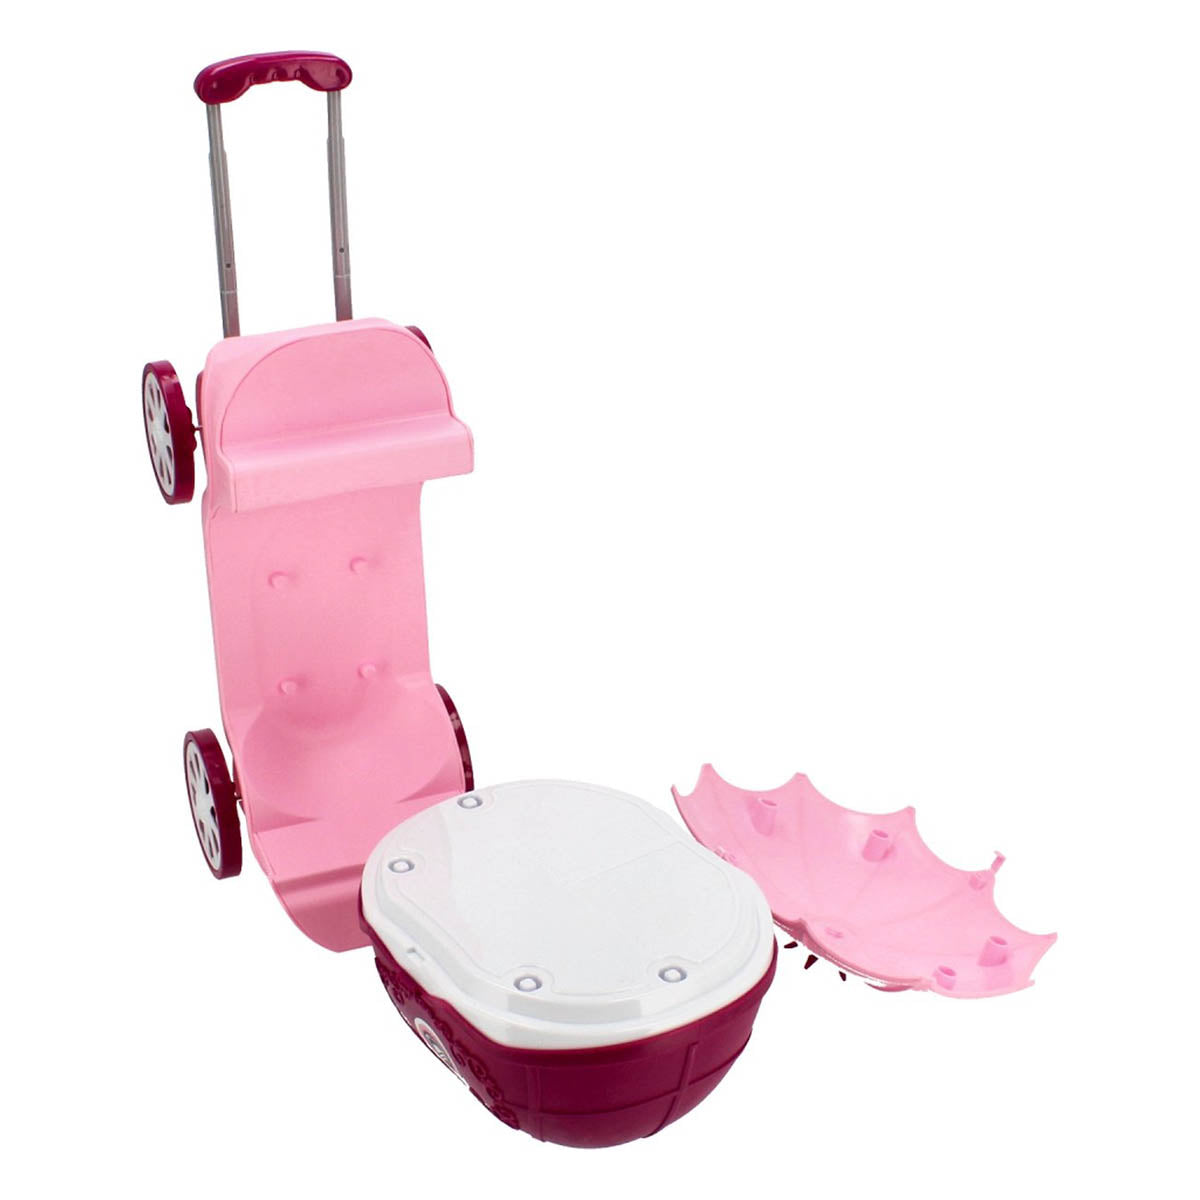 <tc>Ariko</tc> Toy trolley Beauty salon 31 pieces - Hair dryer, mirror, make-up, perfume and much more - handy take-away suitcase with wheels